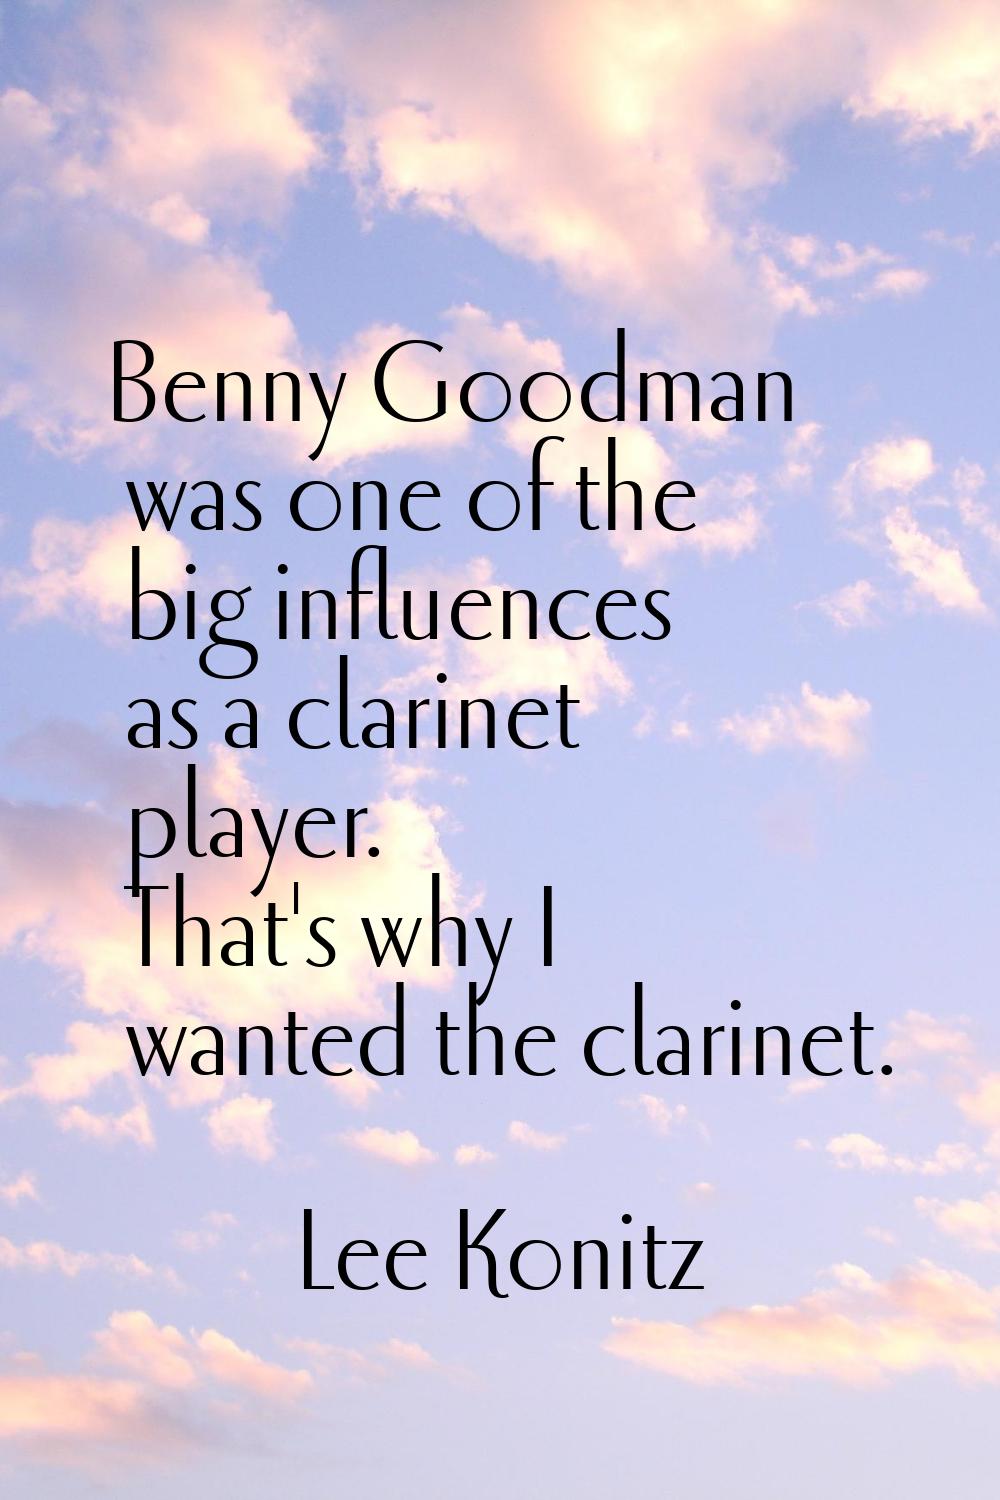 Benny Goodman was one of the big influences as a clarinet player. That's why I wanted the clarinet.